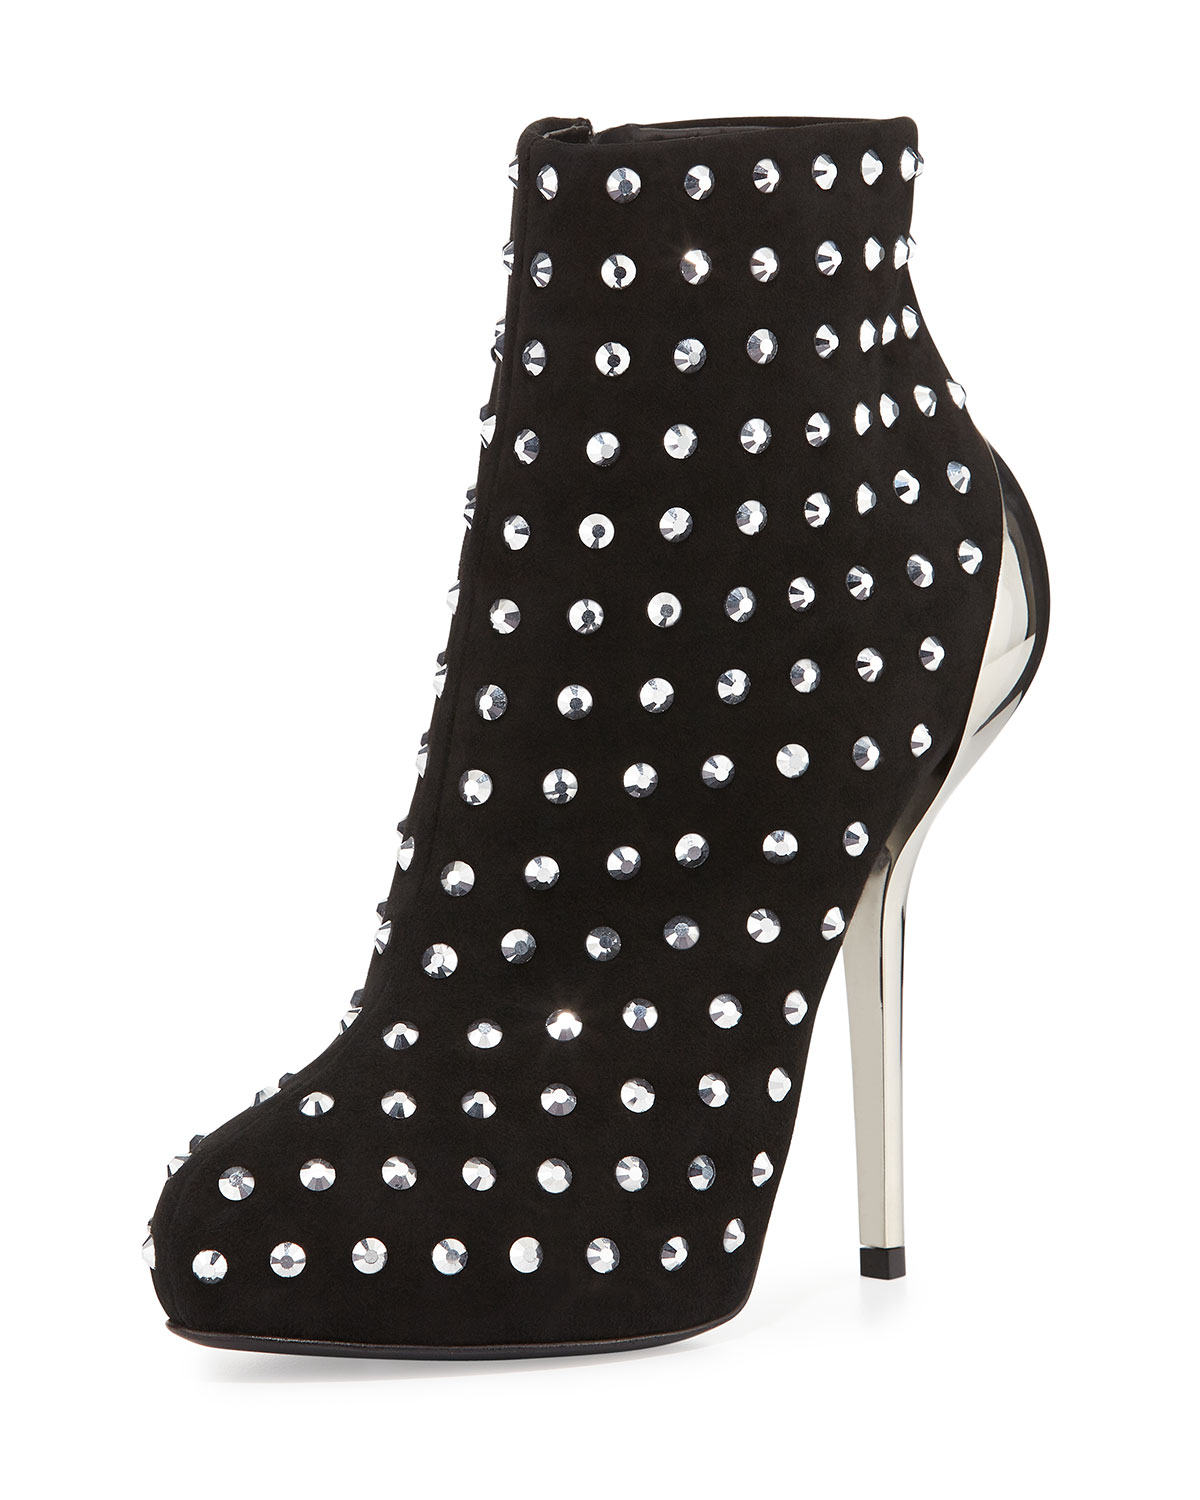 Giuseppe zanotti Crystal Studded Suede Bootie in Black | Lyst